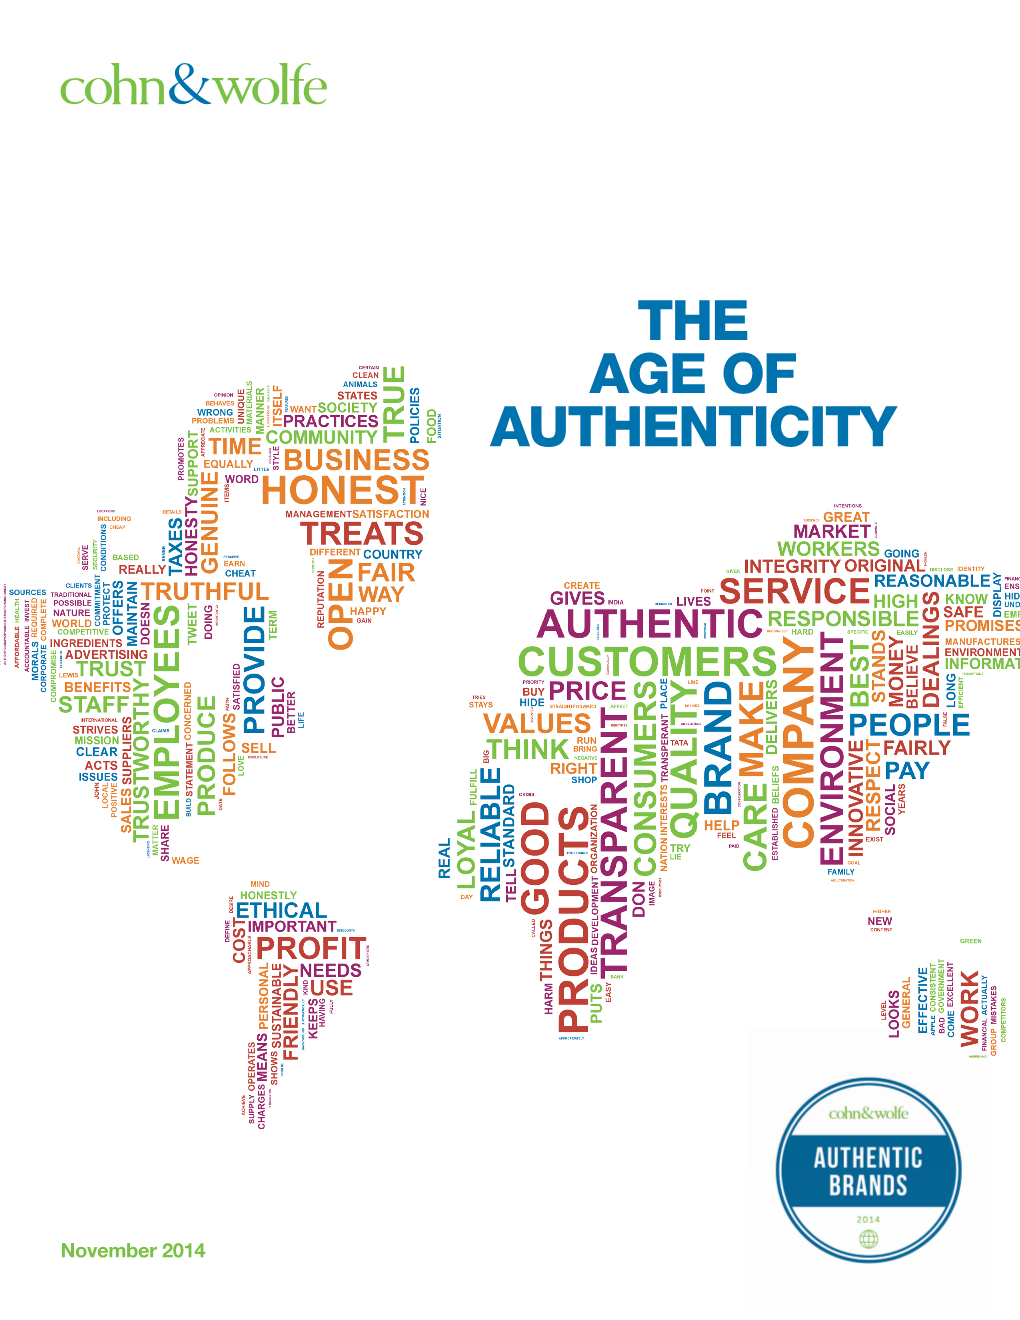 The Age of Authenticity